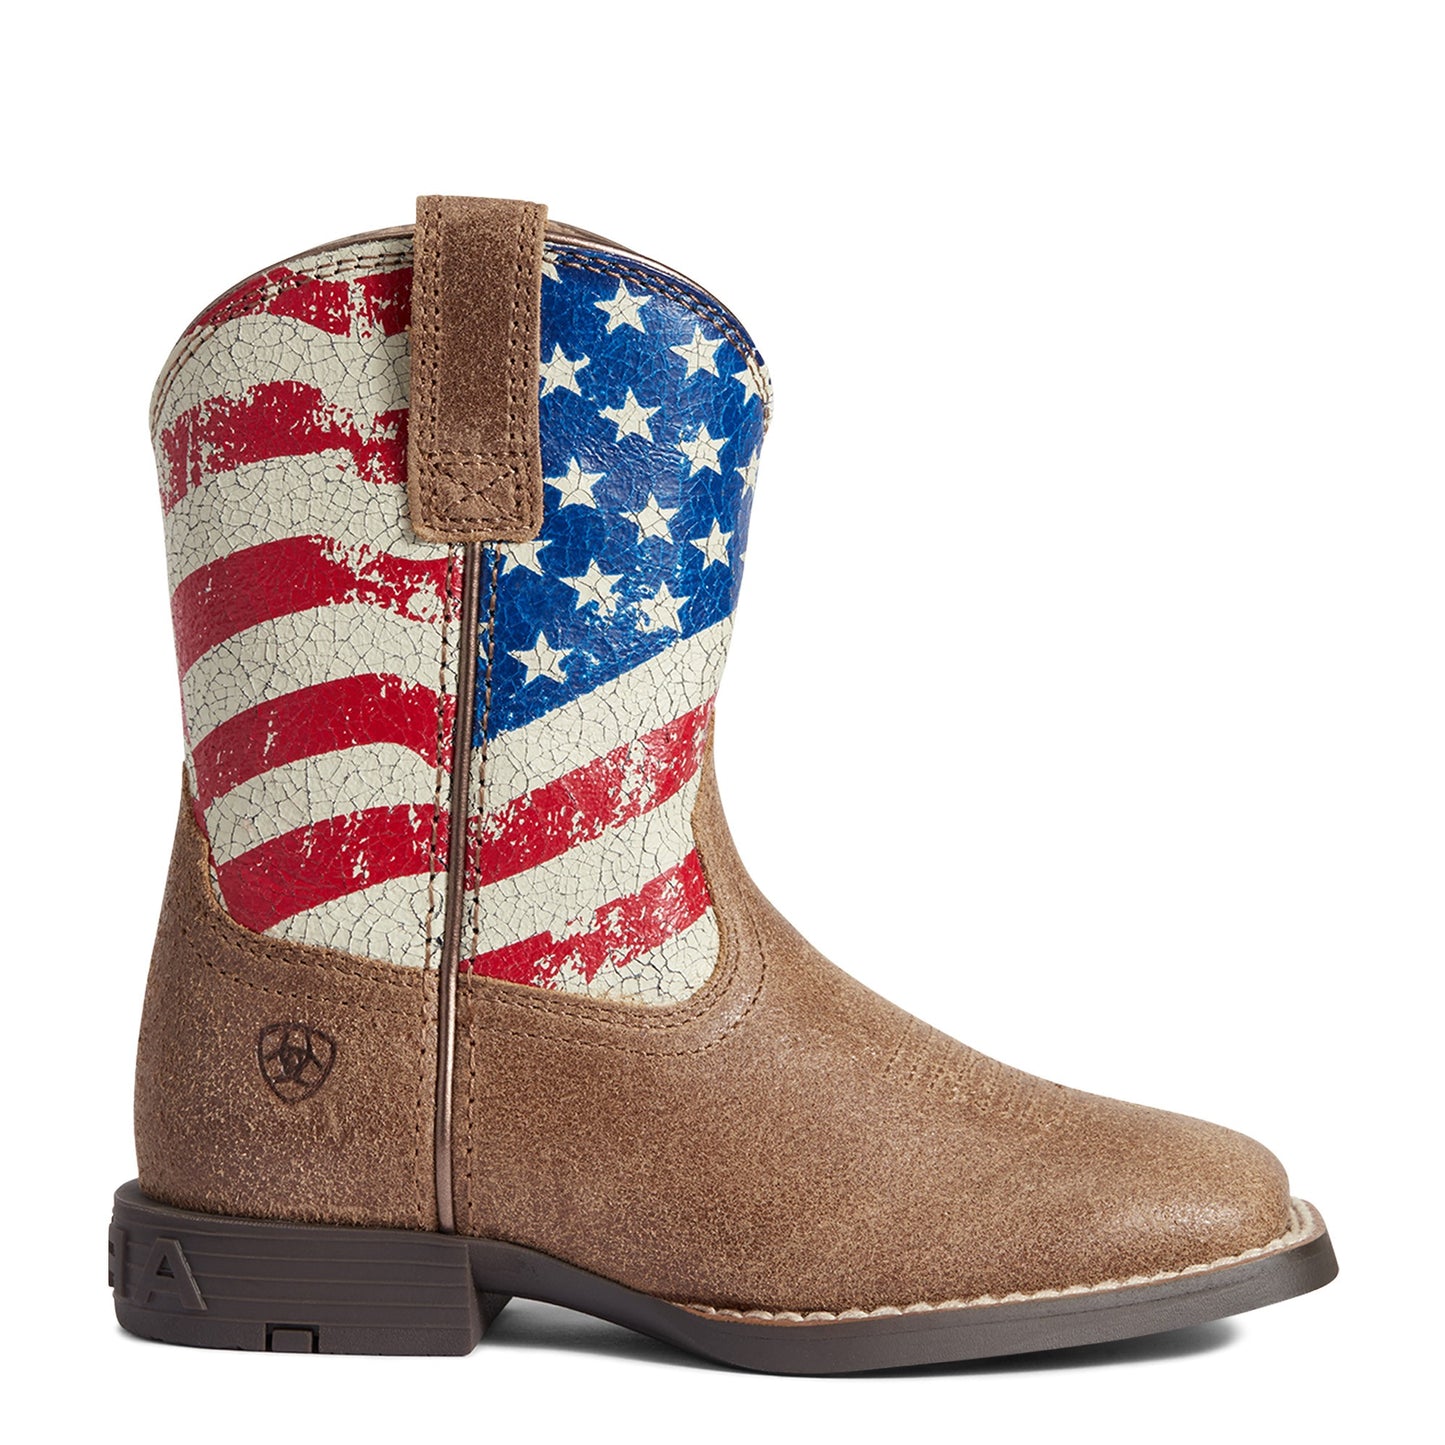 Ariat Children's American Flag Stars &Stripes Leather Boots 10038375